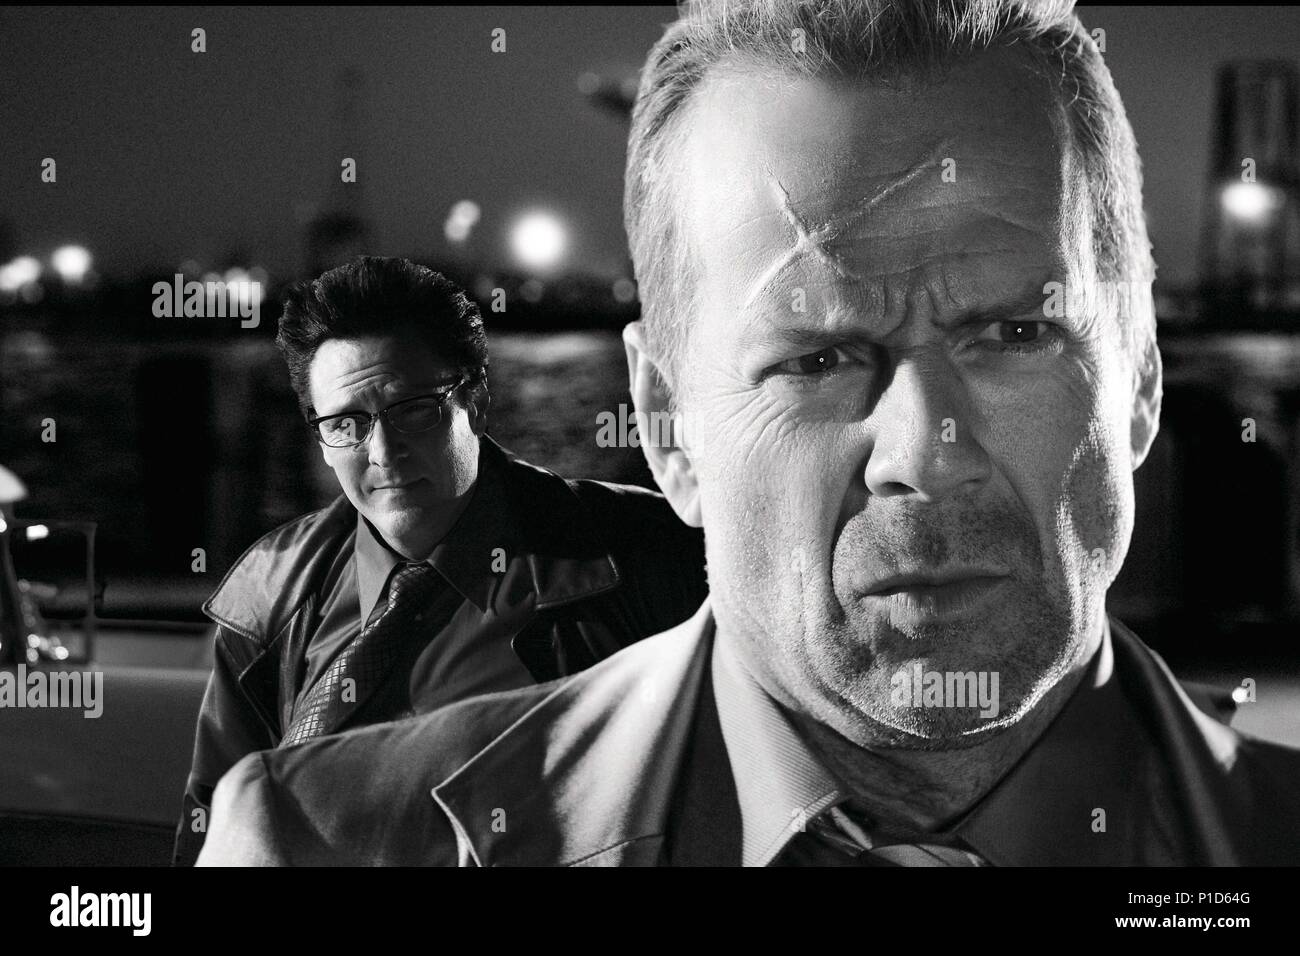 Original Film Title: SIN CITY.  English Title: SIN CITY.  Film Director: ROBERT RODRIGUEZ; FRANK MILLER.  Year: 2005.  Stars: BRUCE WILLIS; MICHAEL MADSEN. Copyright: Editorial inside use only. This is a publicly distributed handout. Access rights only, no license of copyright provided. Mandatory authorization to Visual Icon (www.visual-icon.com) is required for the reproduction of this image. Credit: DIMENSION FILMS / Album Stock Photo